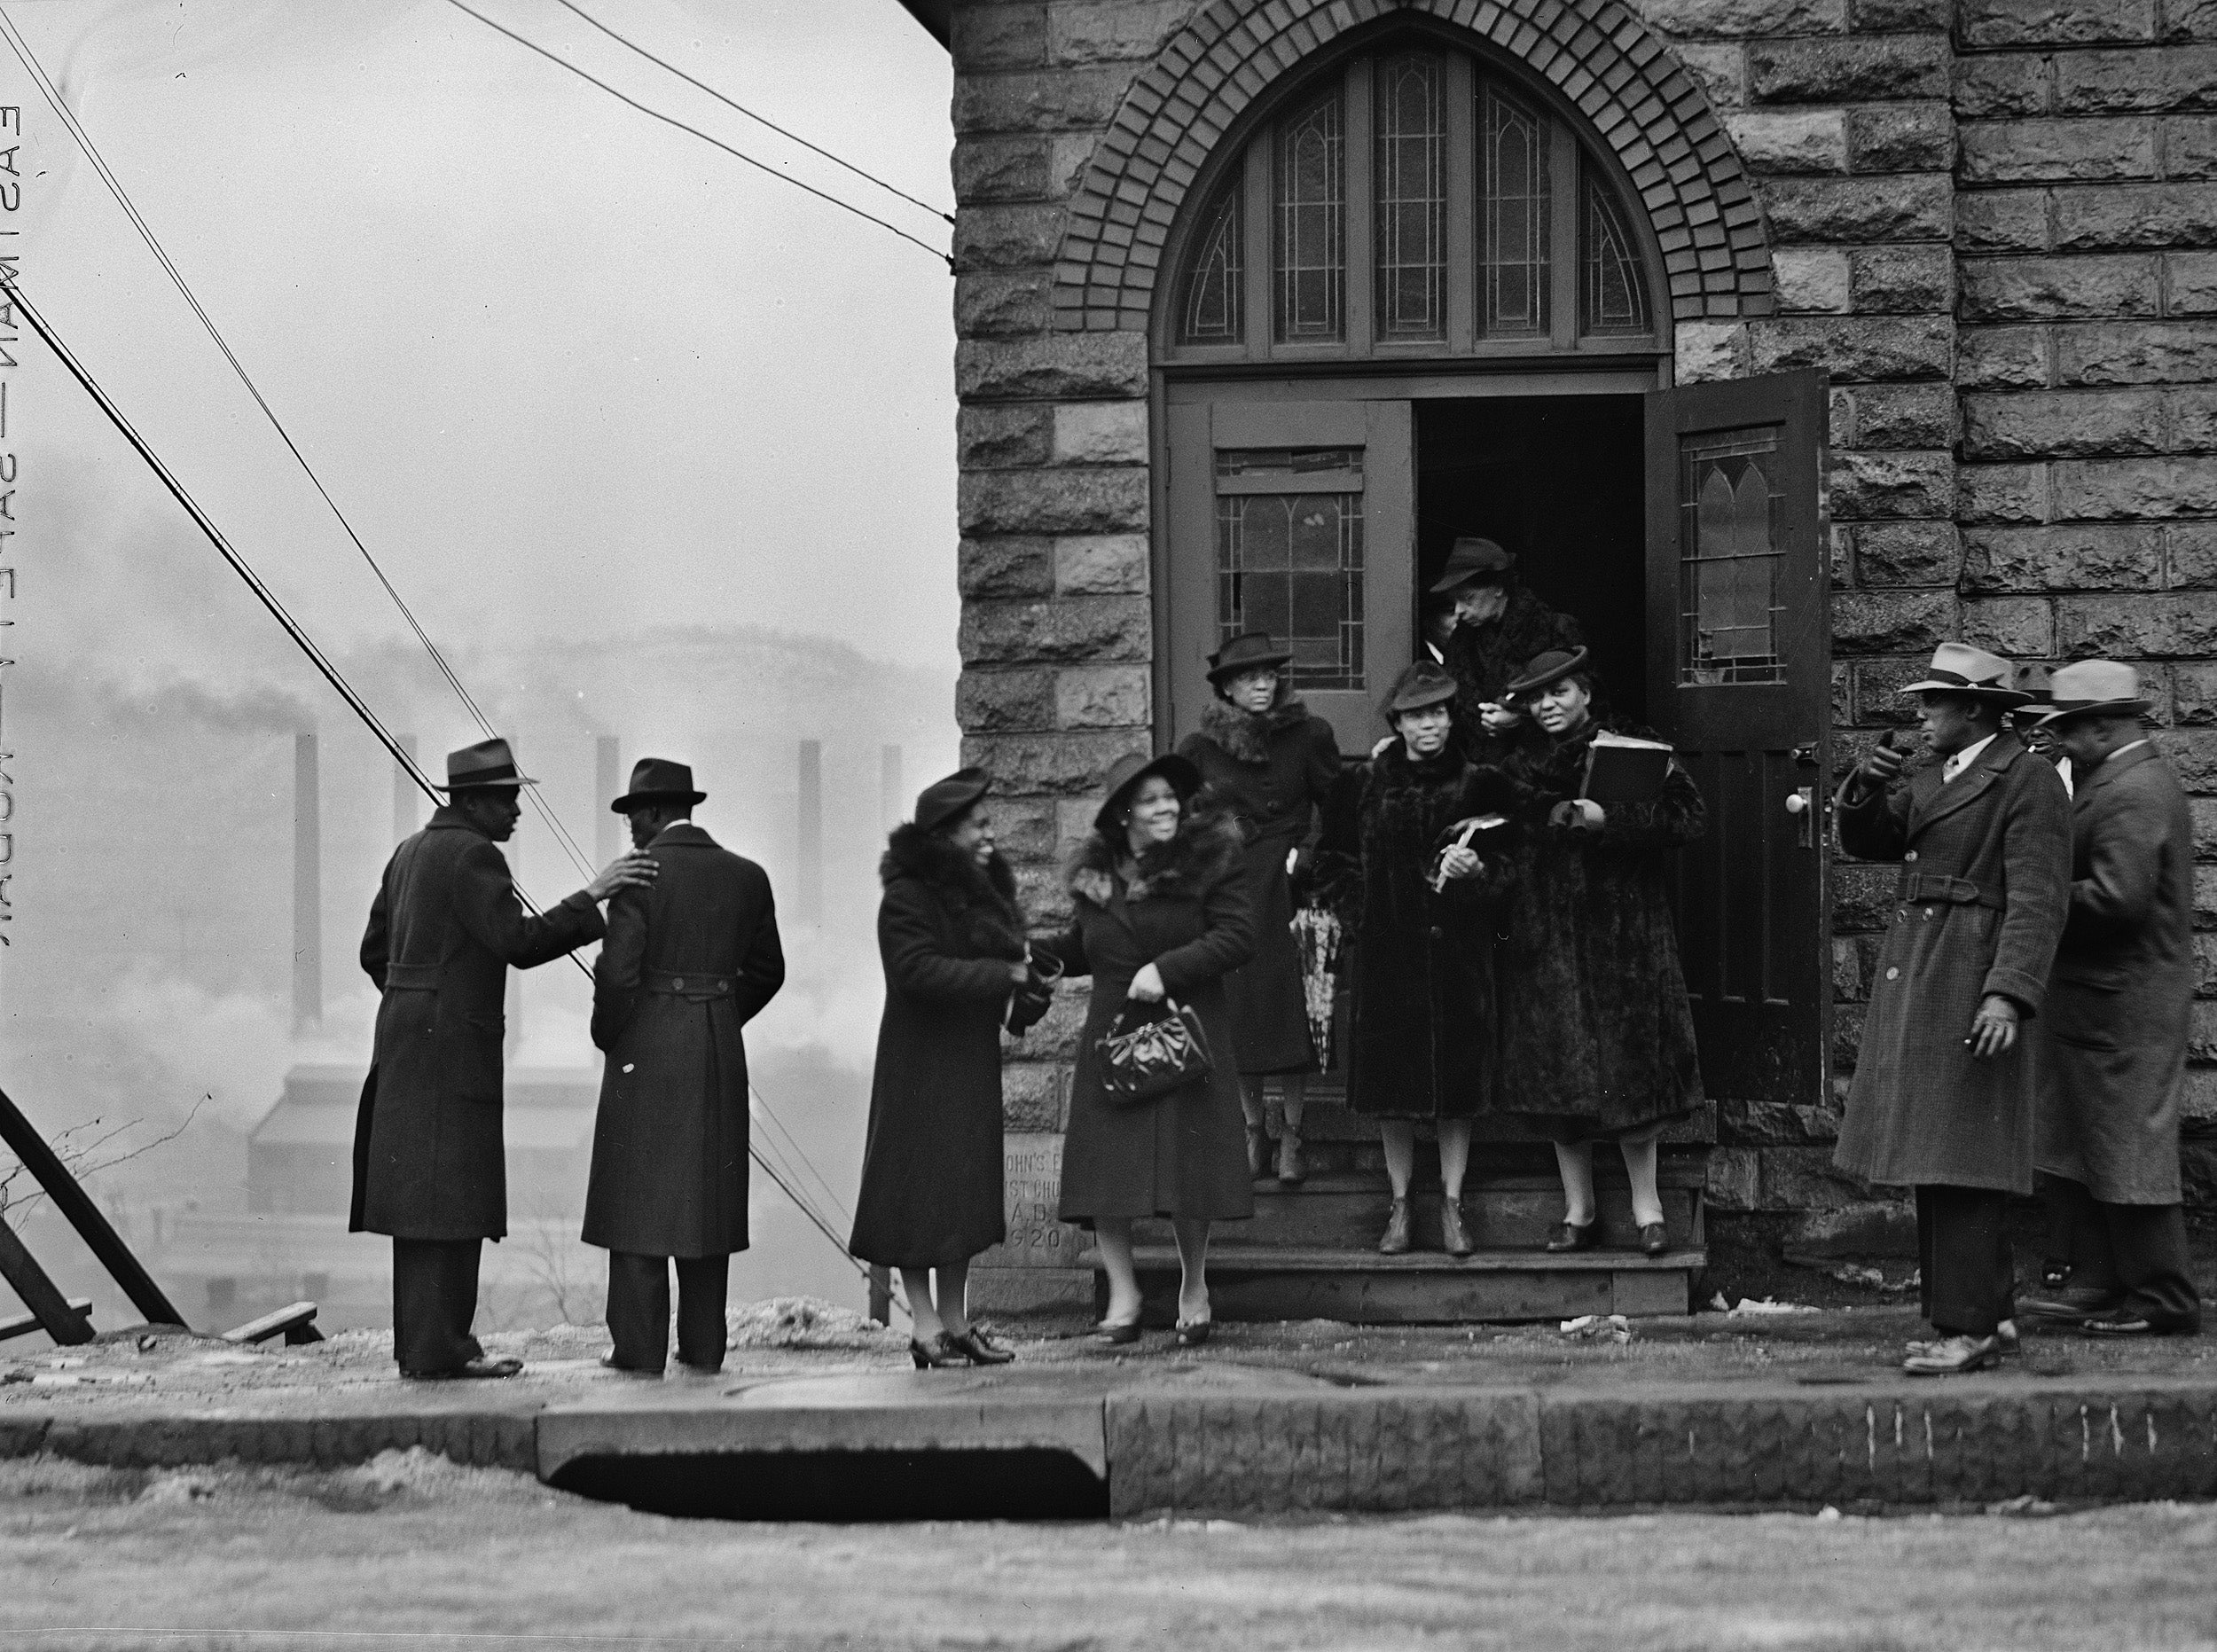 A congregation exiting a church in Pittsburgh.